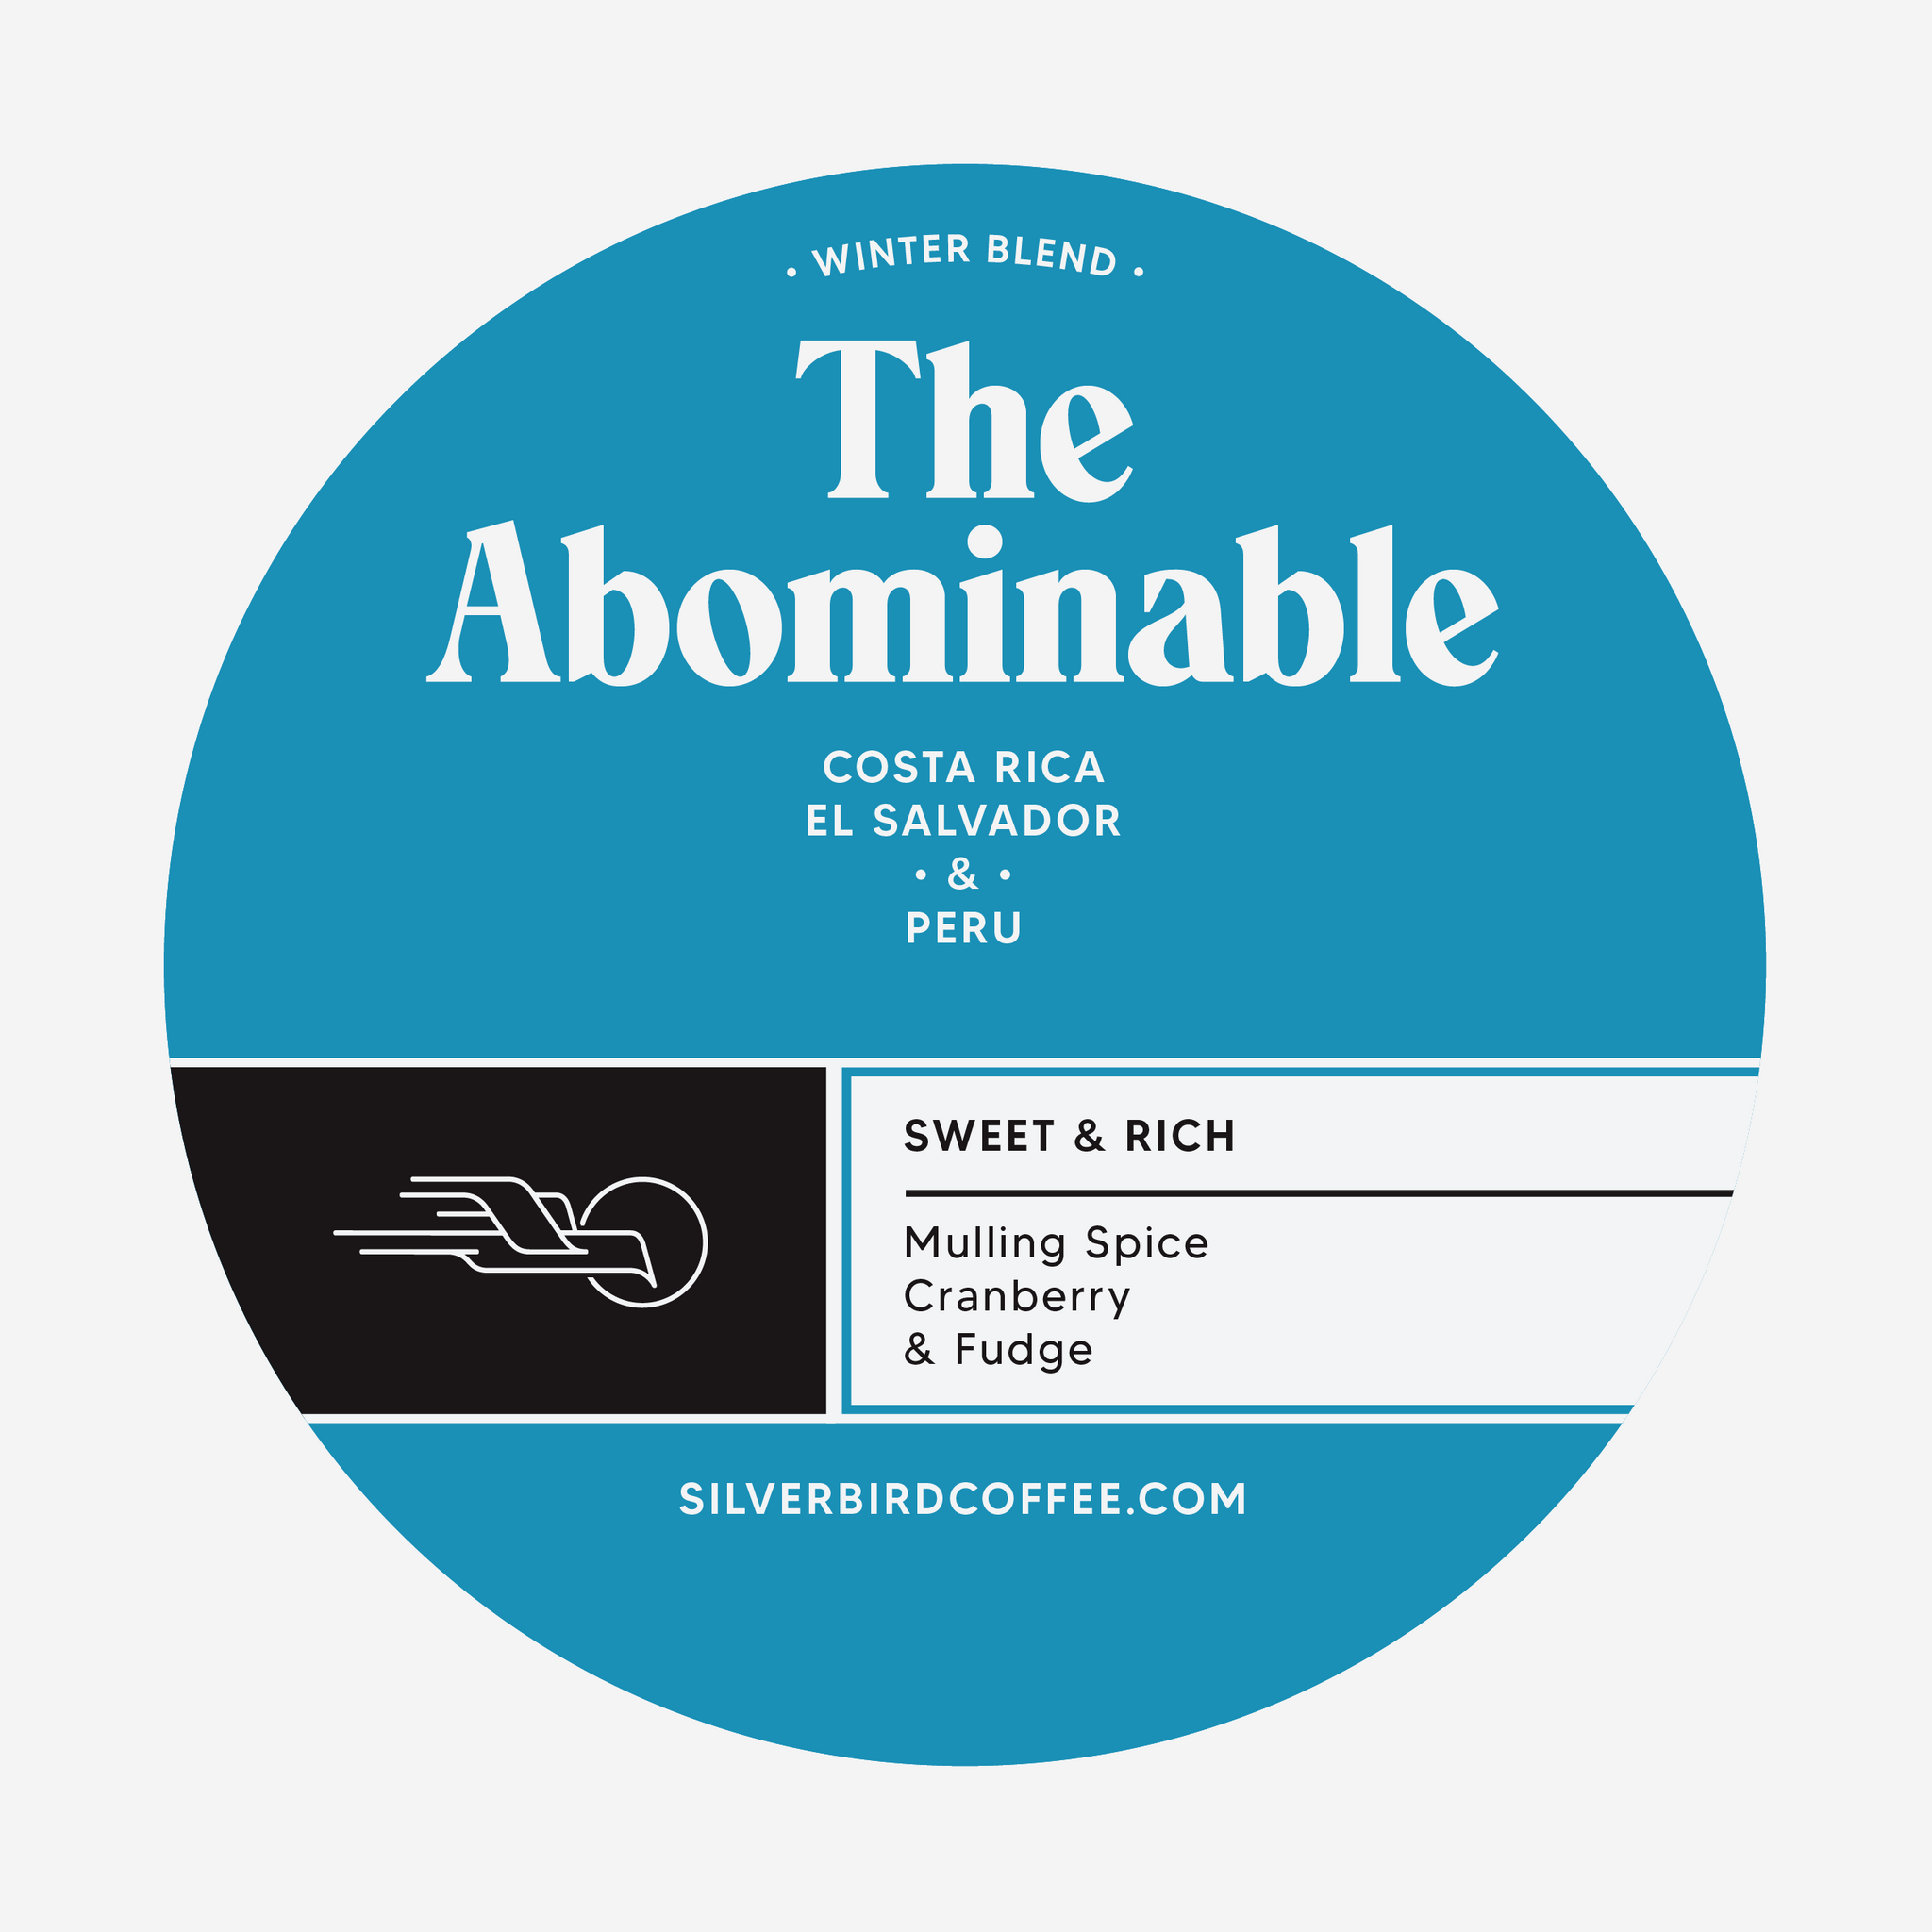 The Abominable - Winter Blend